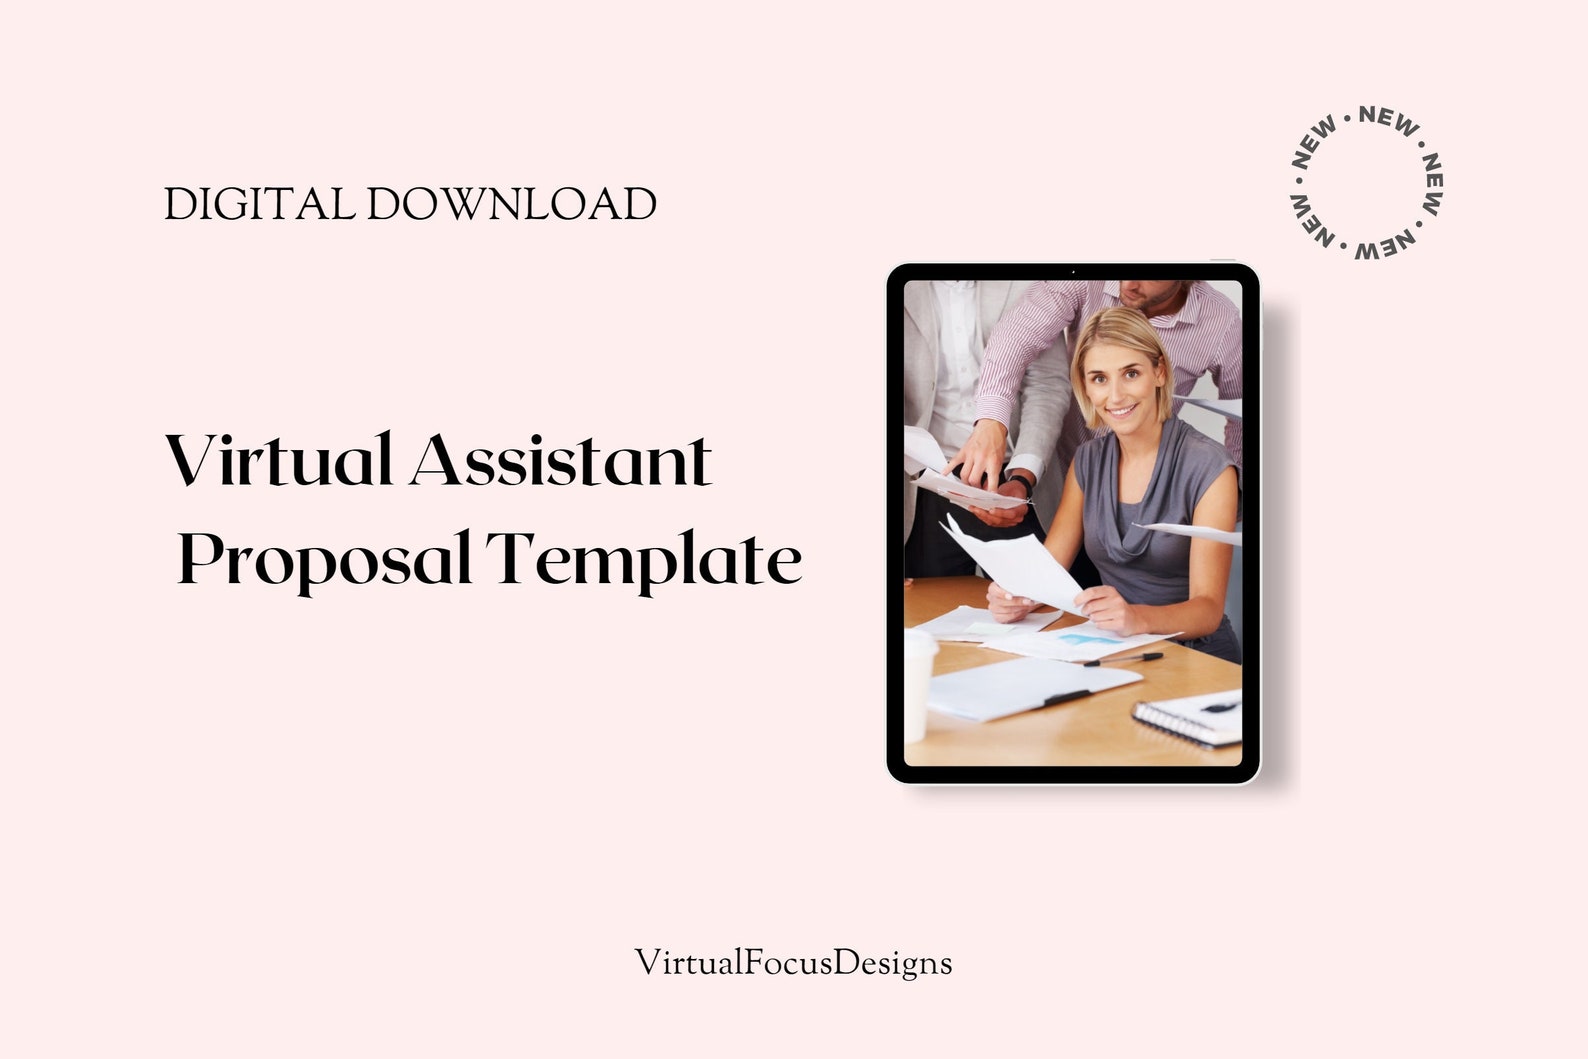 virtual-assistant-proposal-template-job-project-proposal-on-etsy